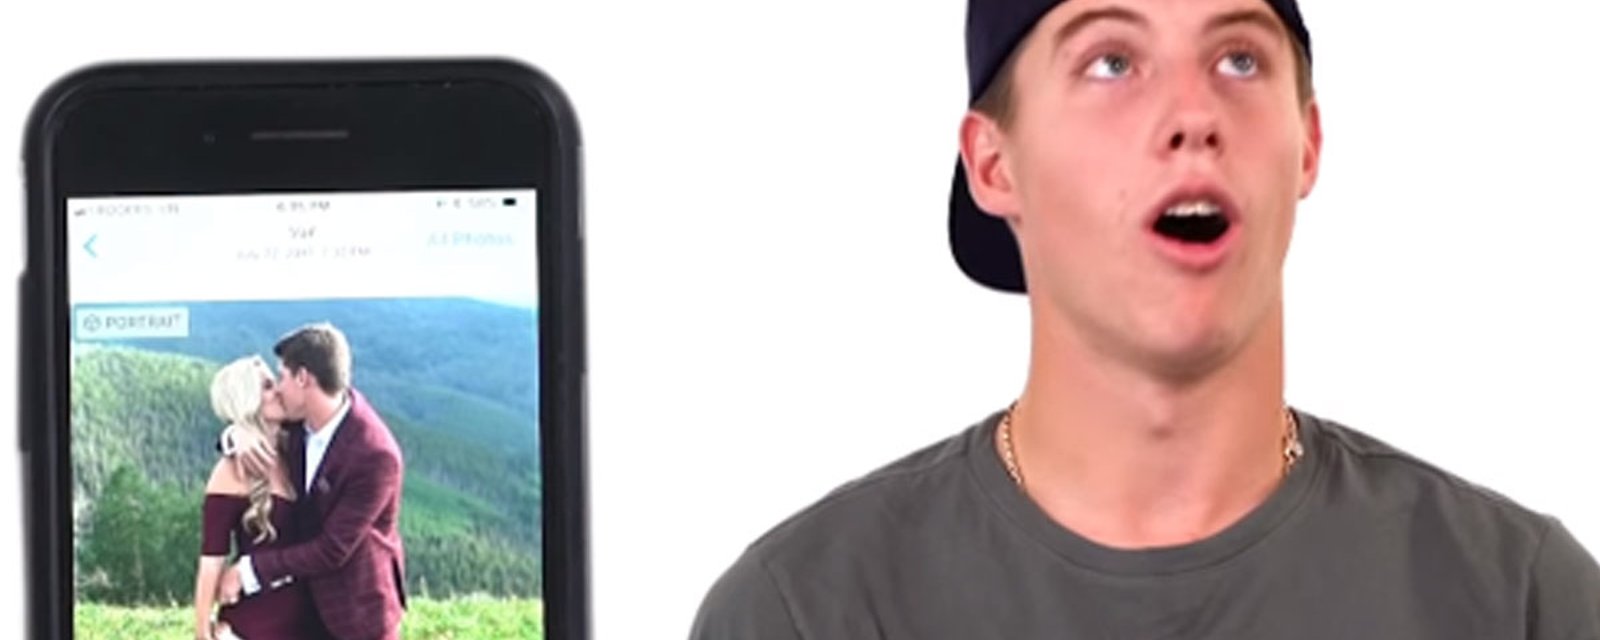 Marner reacts to photos randomly pulled from his phone while playing camera roll roulette! 